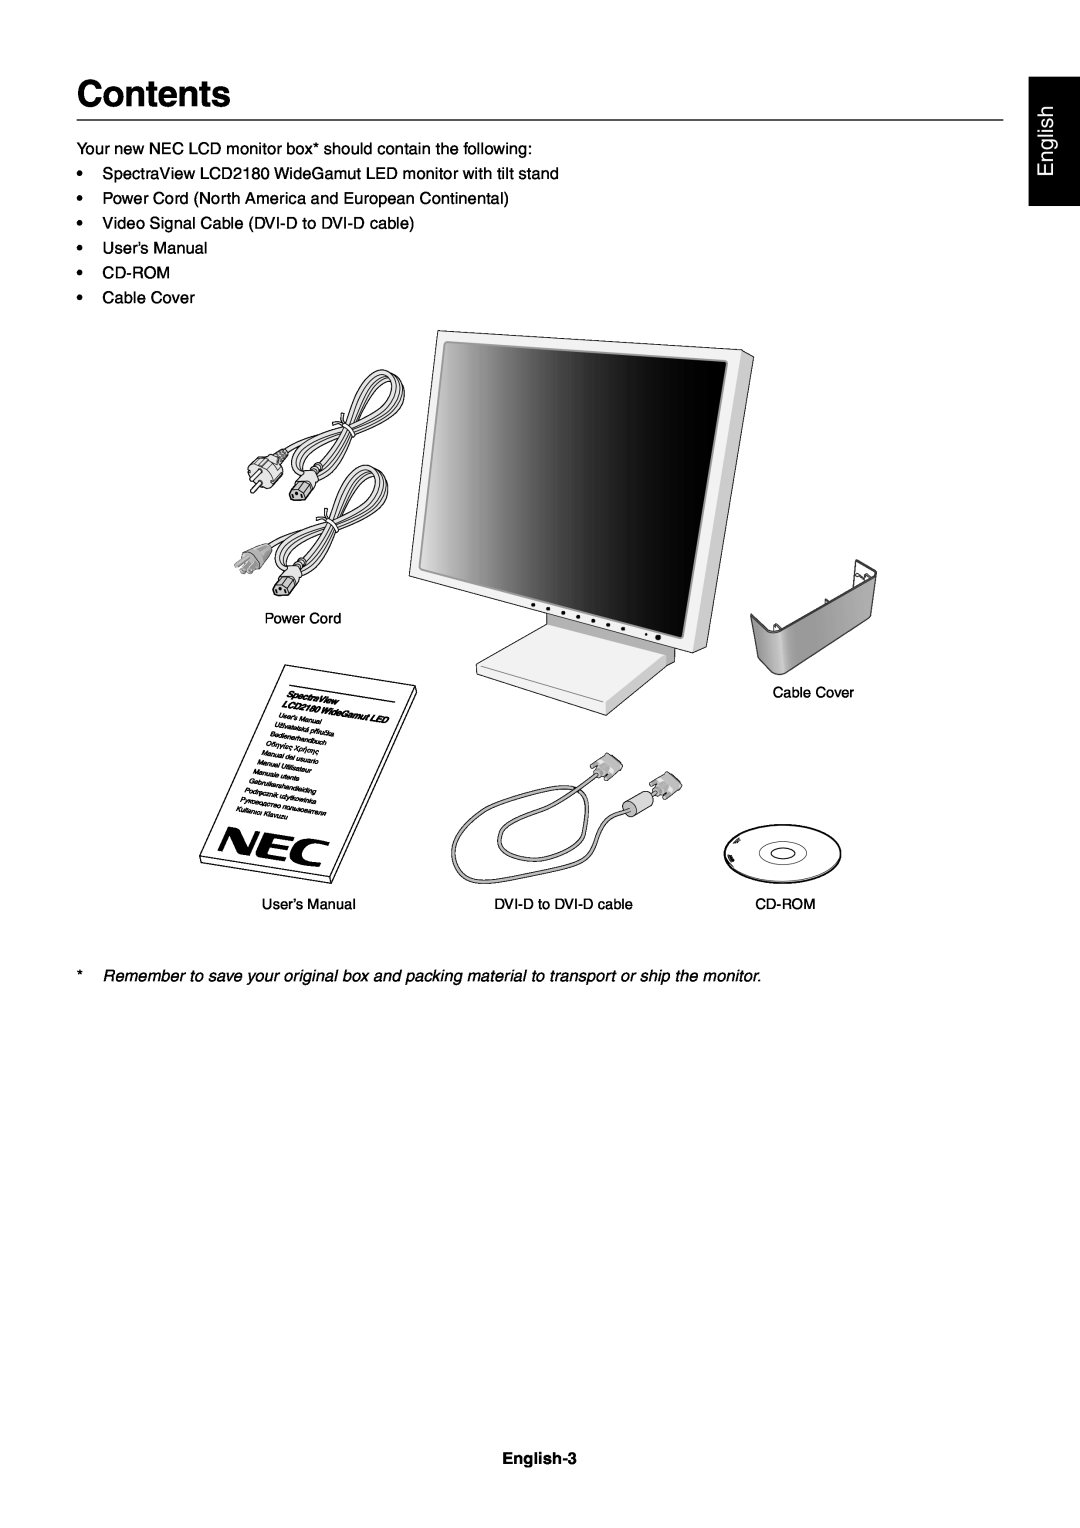 NEC LCD2180 user manual Contents, English-3 